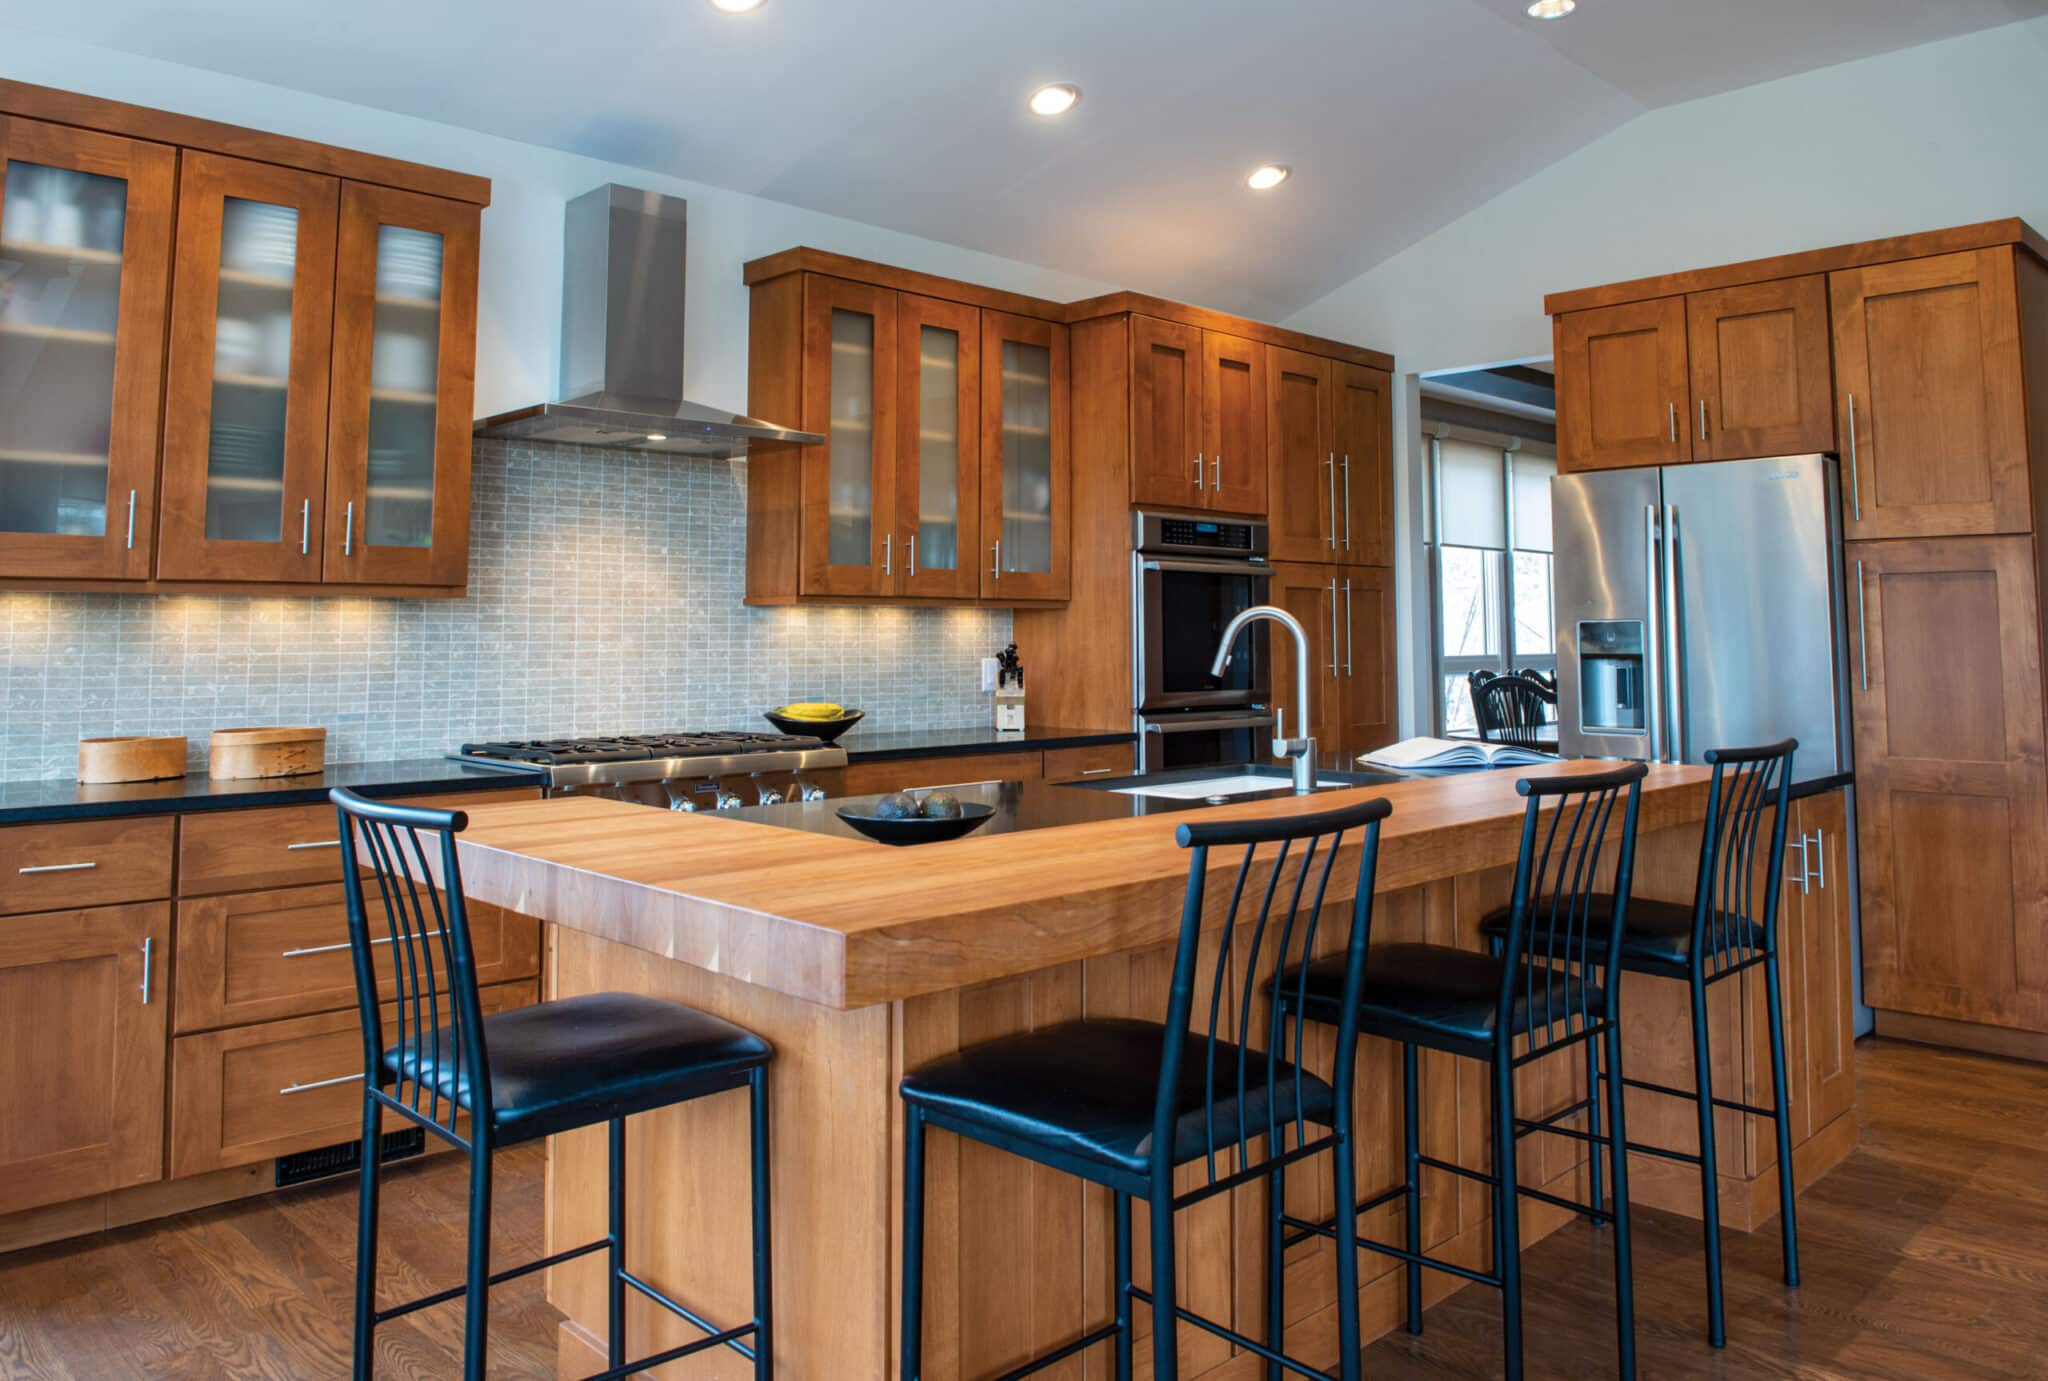 Woodharbor wood kitchen cabinets with black countertops and wood kitchen island top